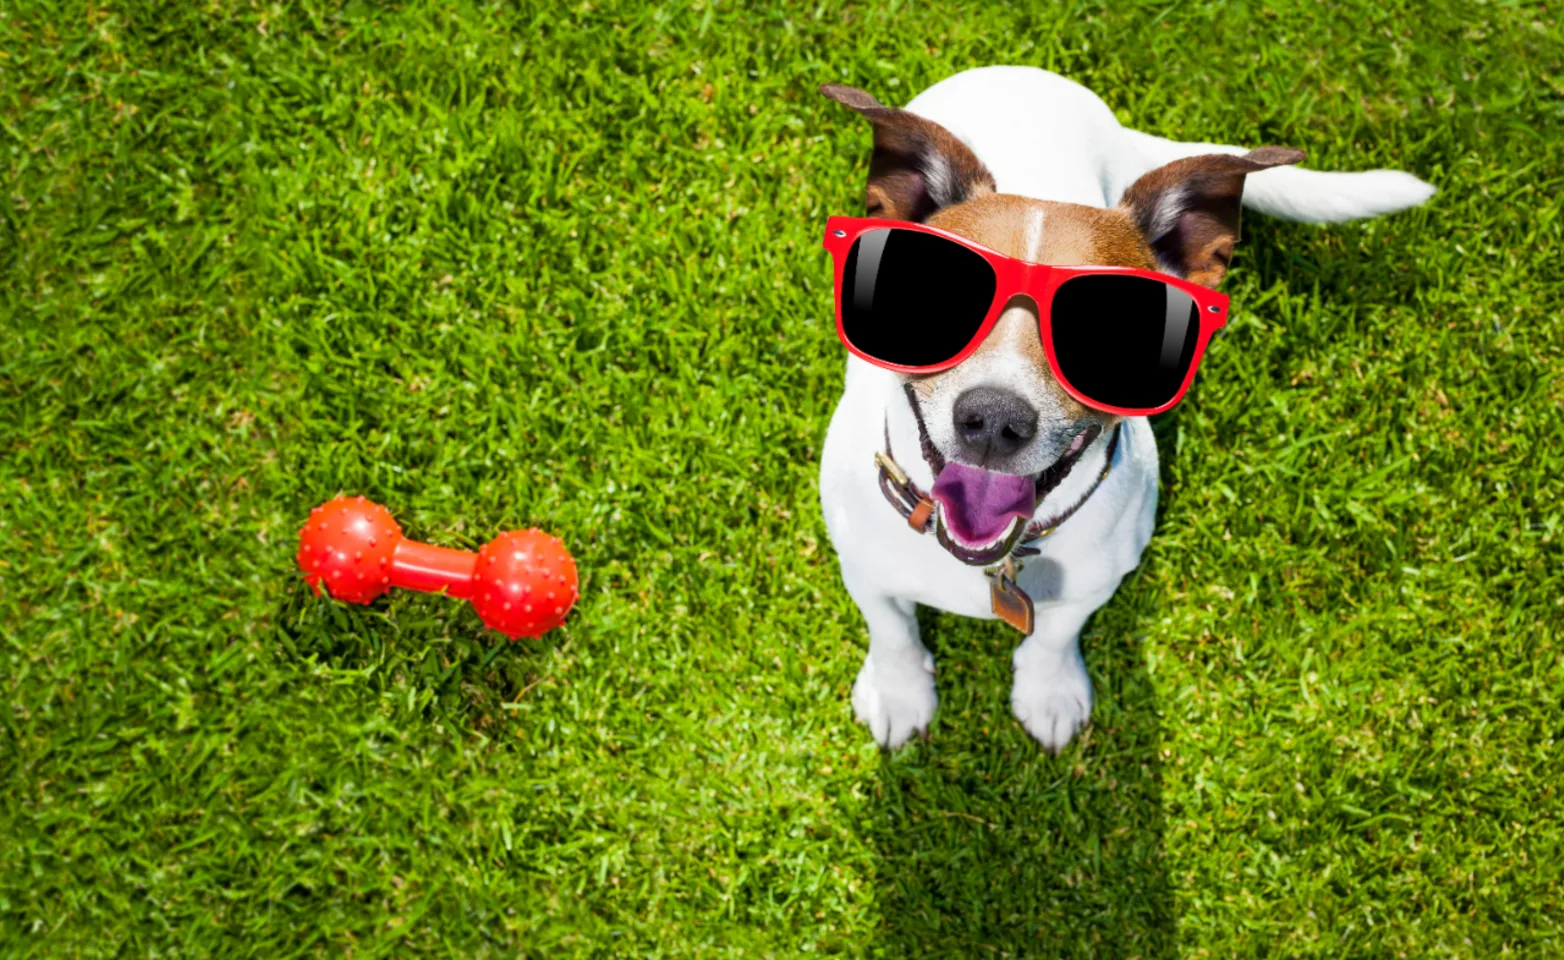 Small dog sitting on grass wearing red sunglasses next to a red chew tory